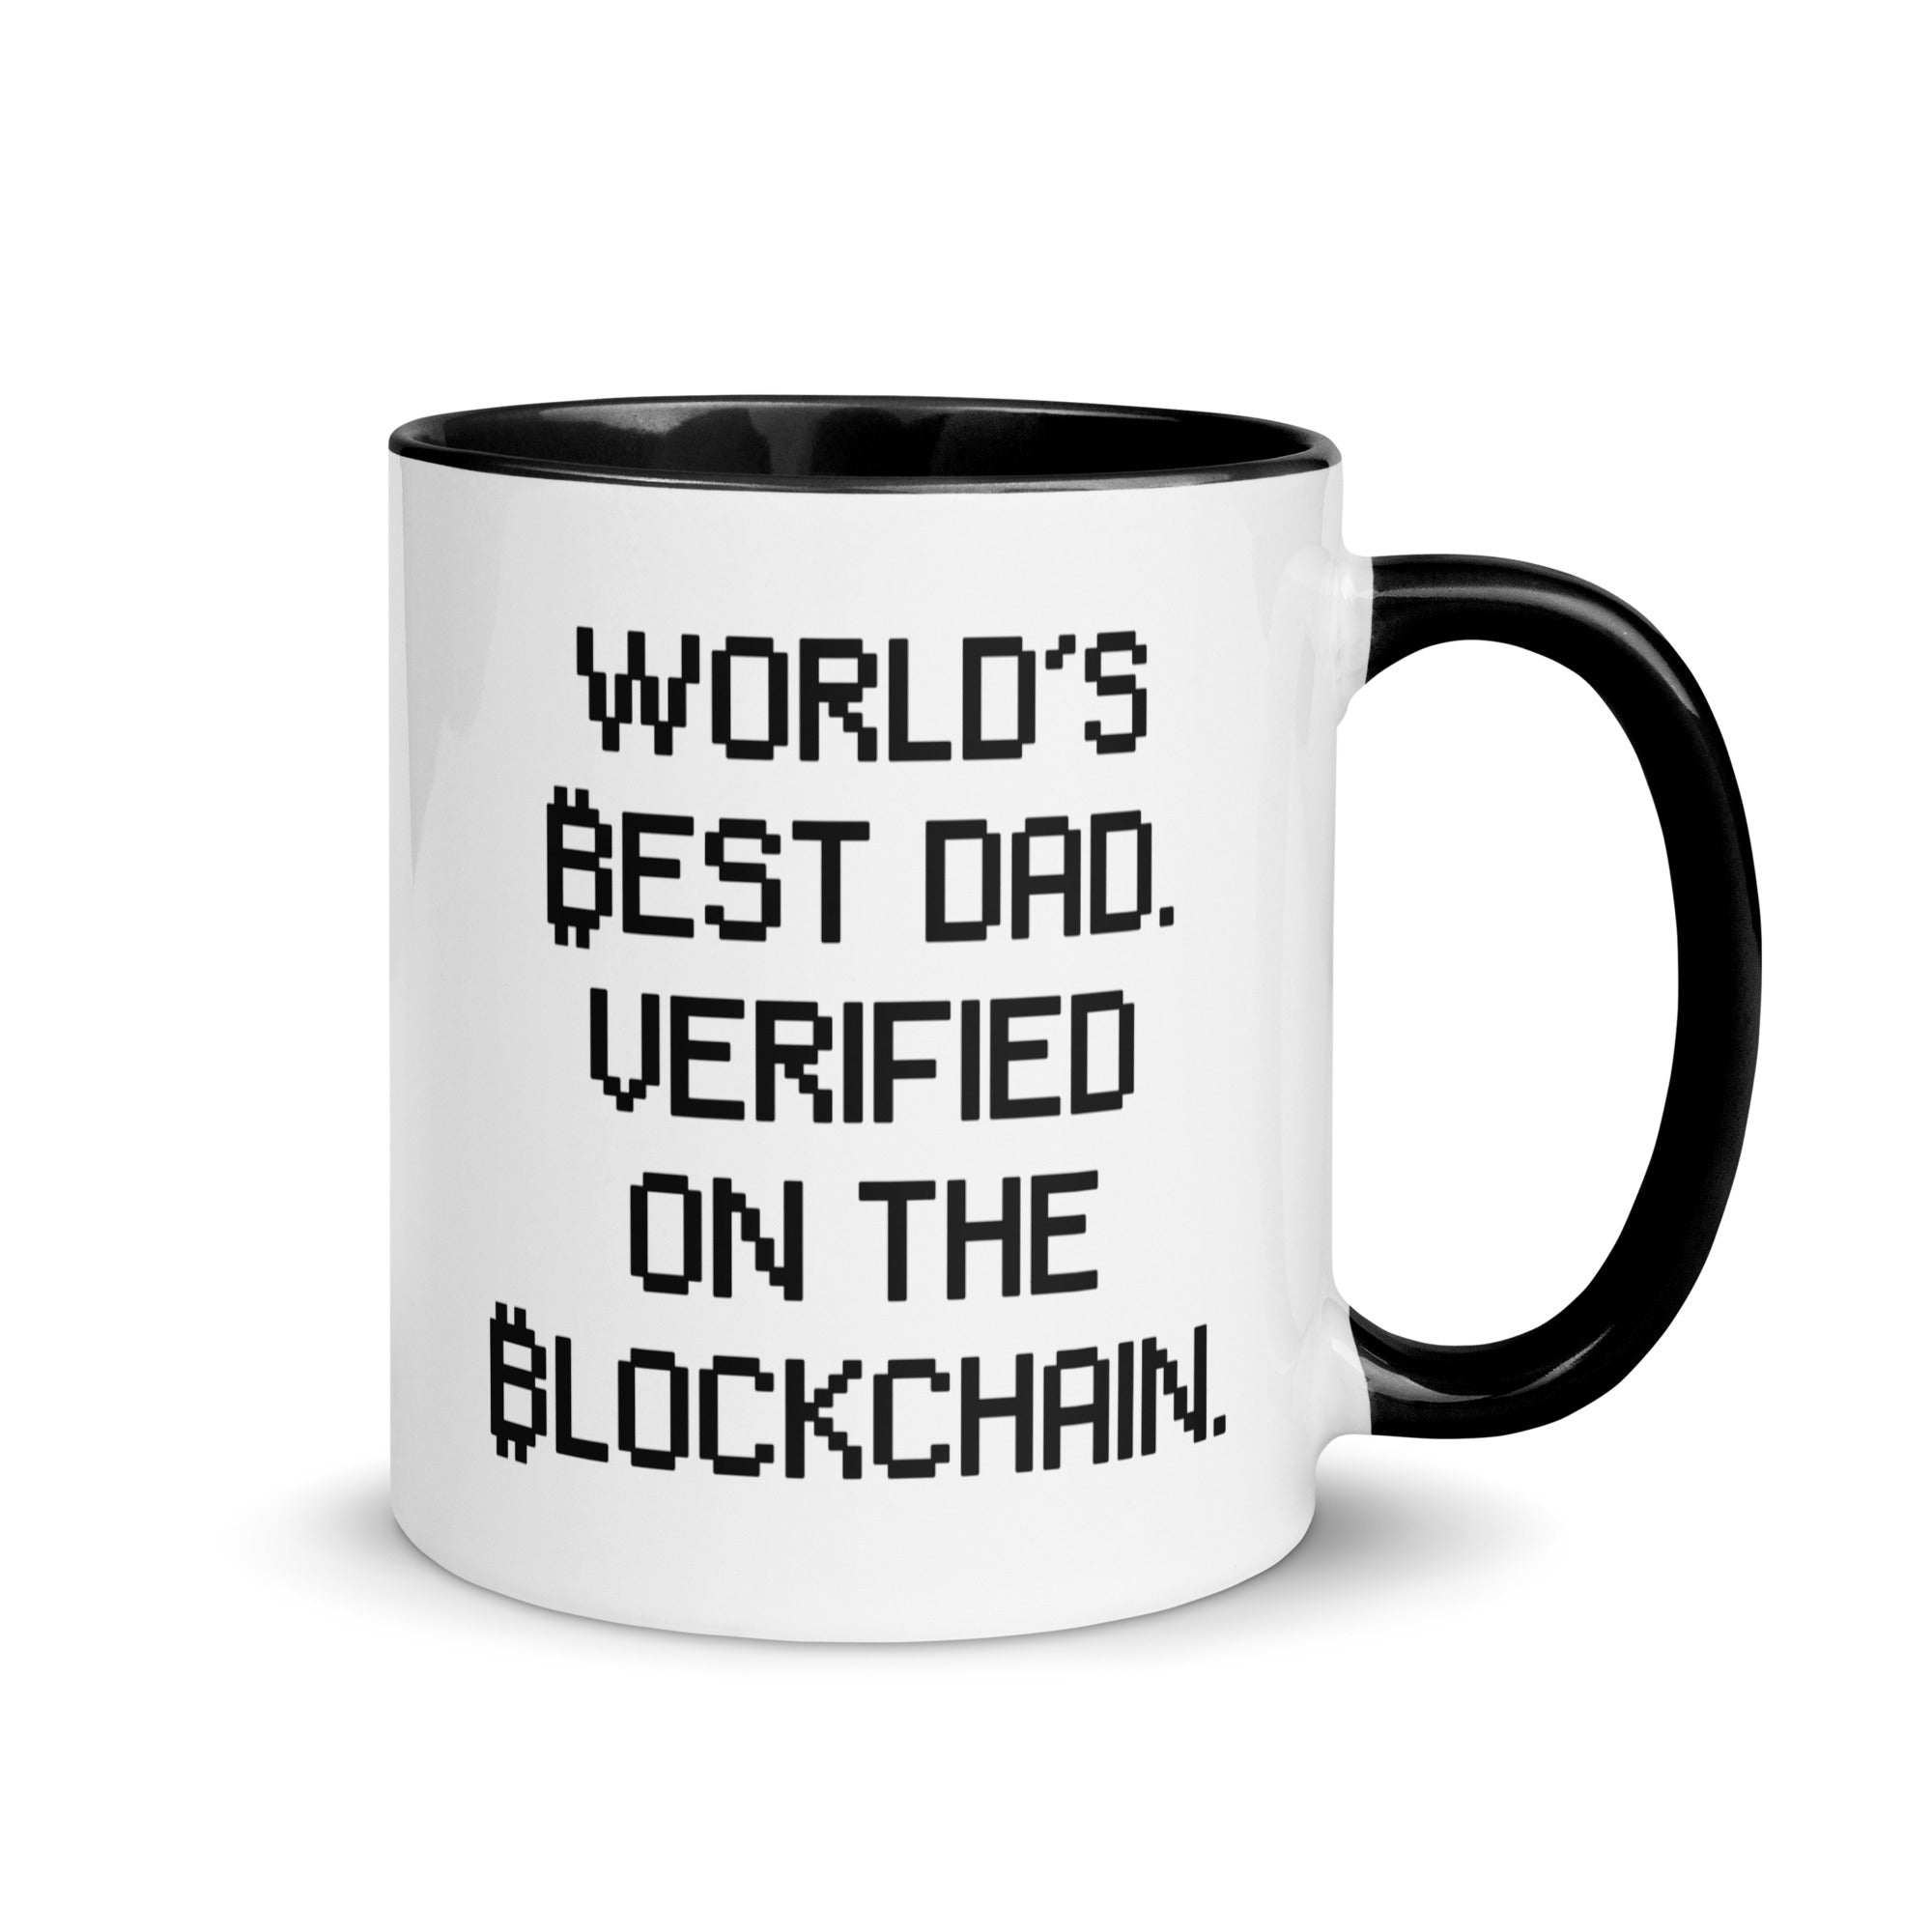 Bitcoin Mug: World's Best Dad - Verified on the Blockchain. Right handle view. Available from NEONCRYPTO STORE.